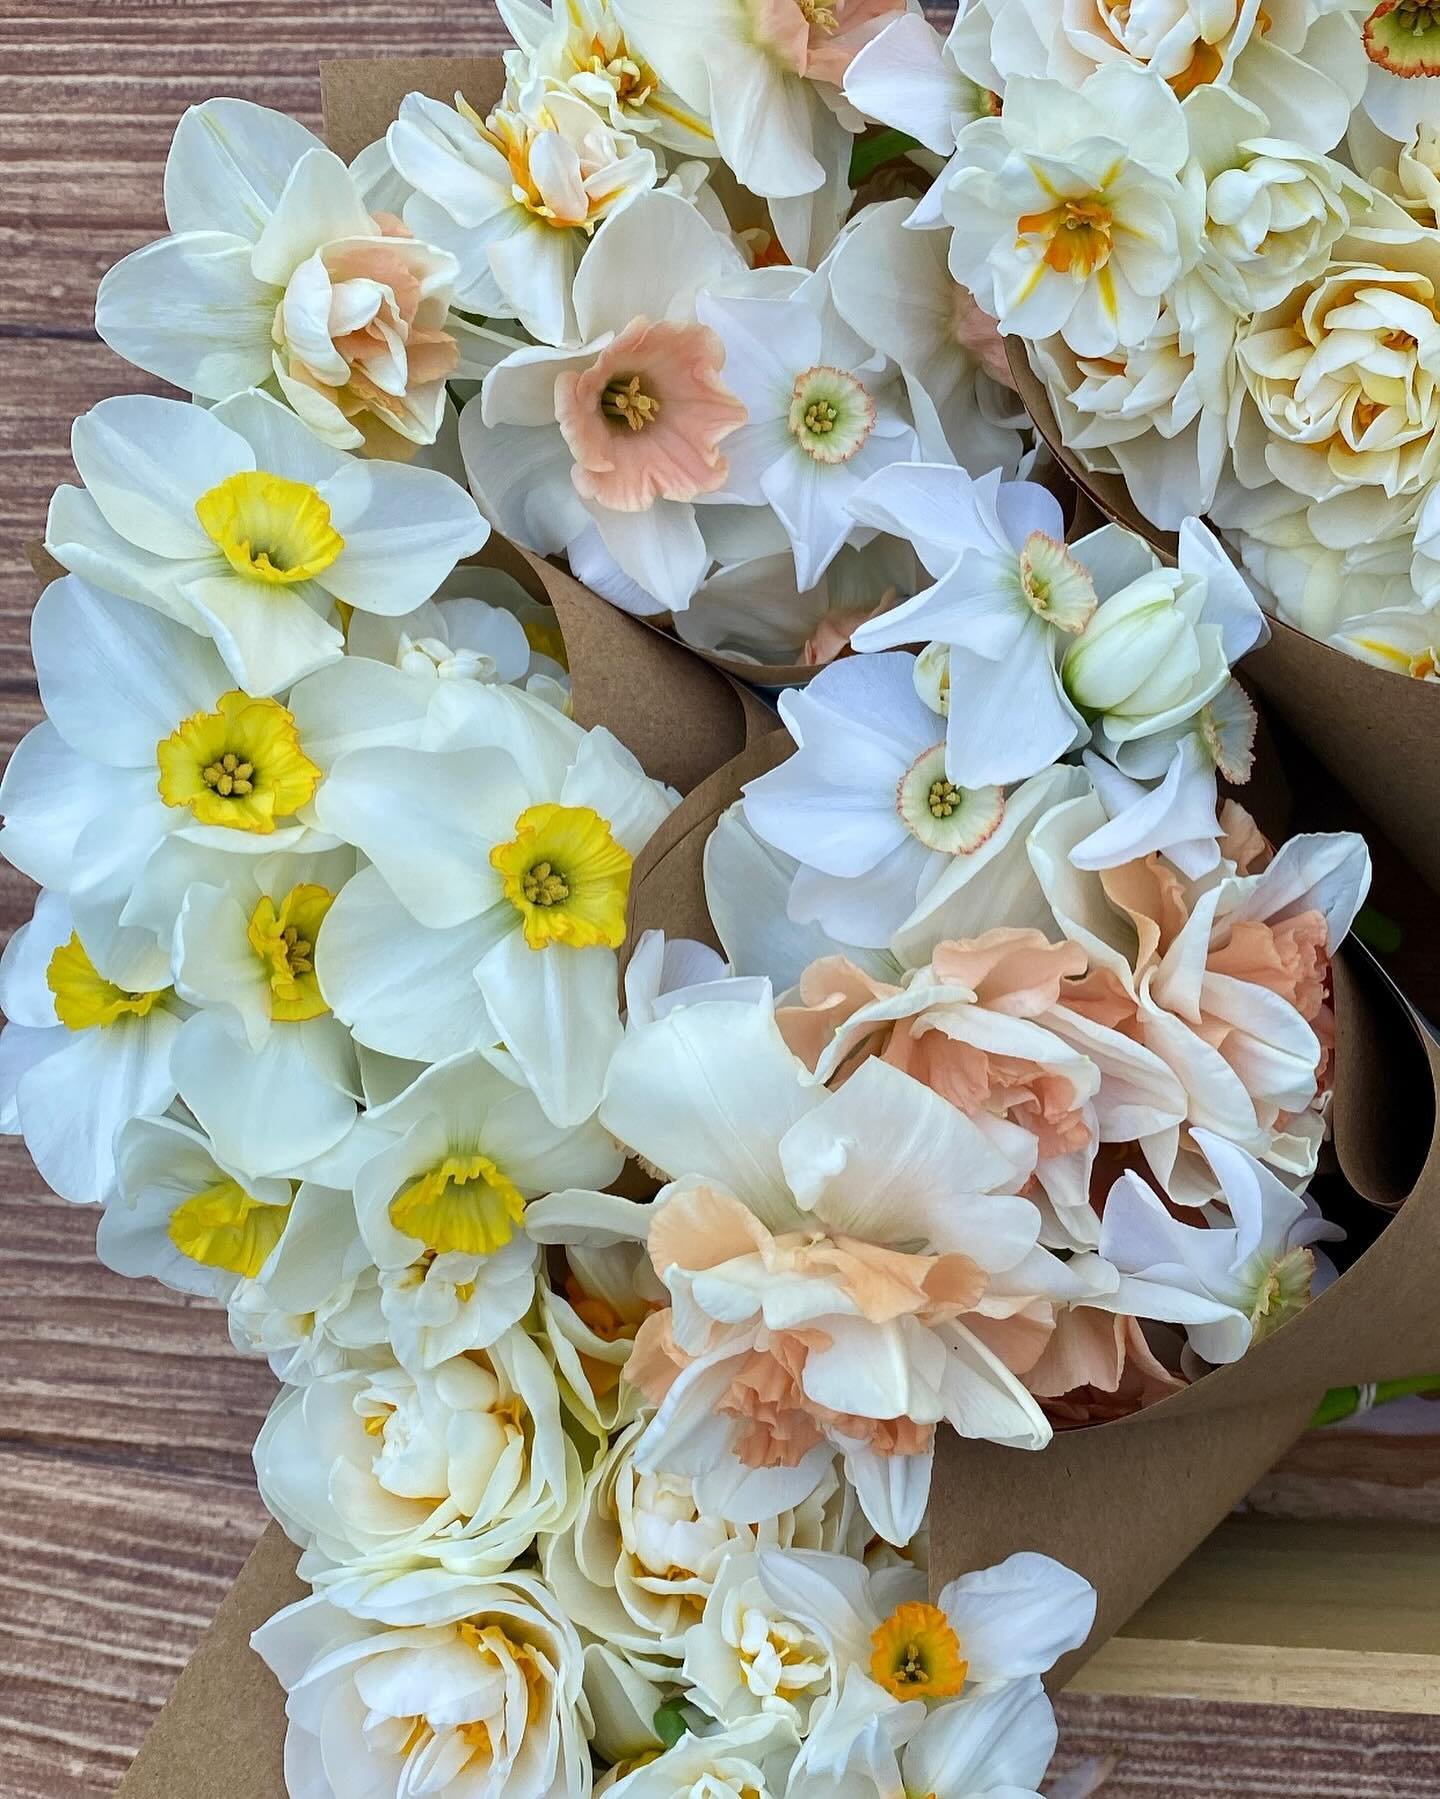 We have just a few of these homegrown cutie bunches of narcissus left before they&rsquo;ll be done for the season. They smell incredible! 

🌼$15 Narcissus Bunches 
🌼Reserve for pickup: Friday-Saturday | 4/26-4/27 
🌼Cedar Rose Porch Pickup - Carmel